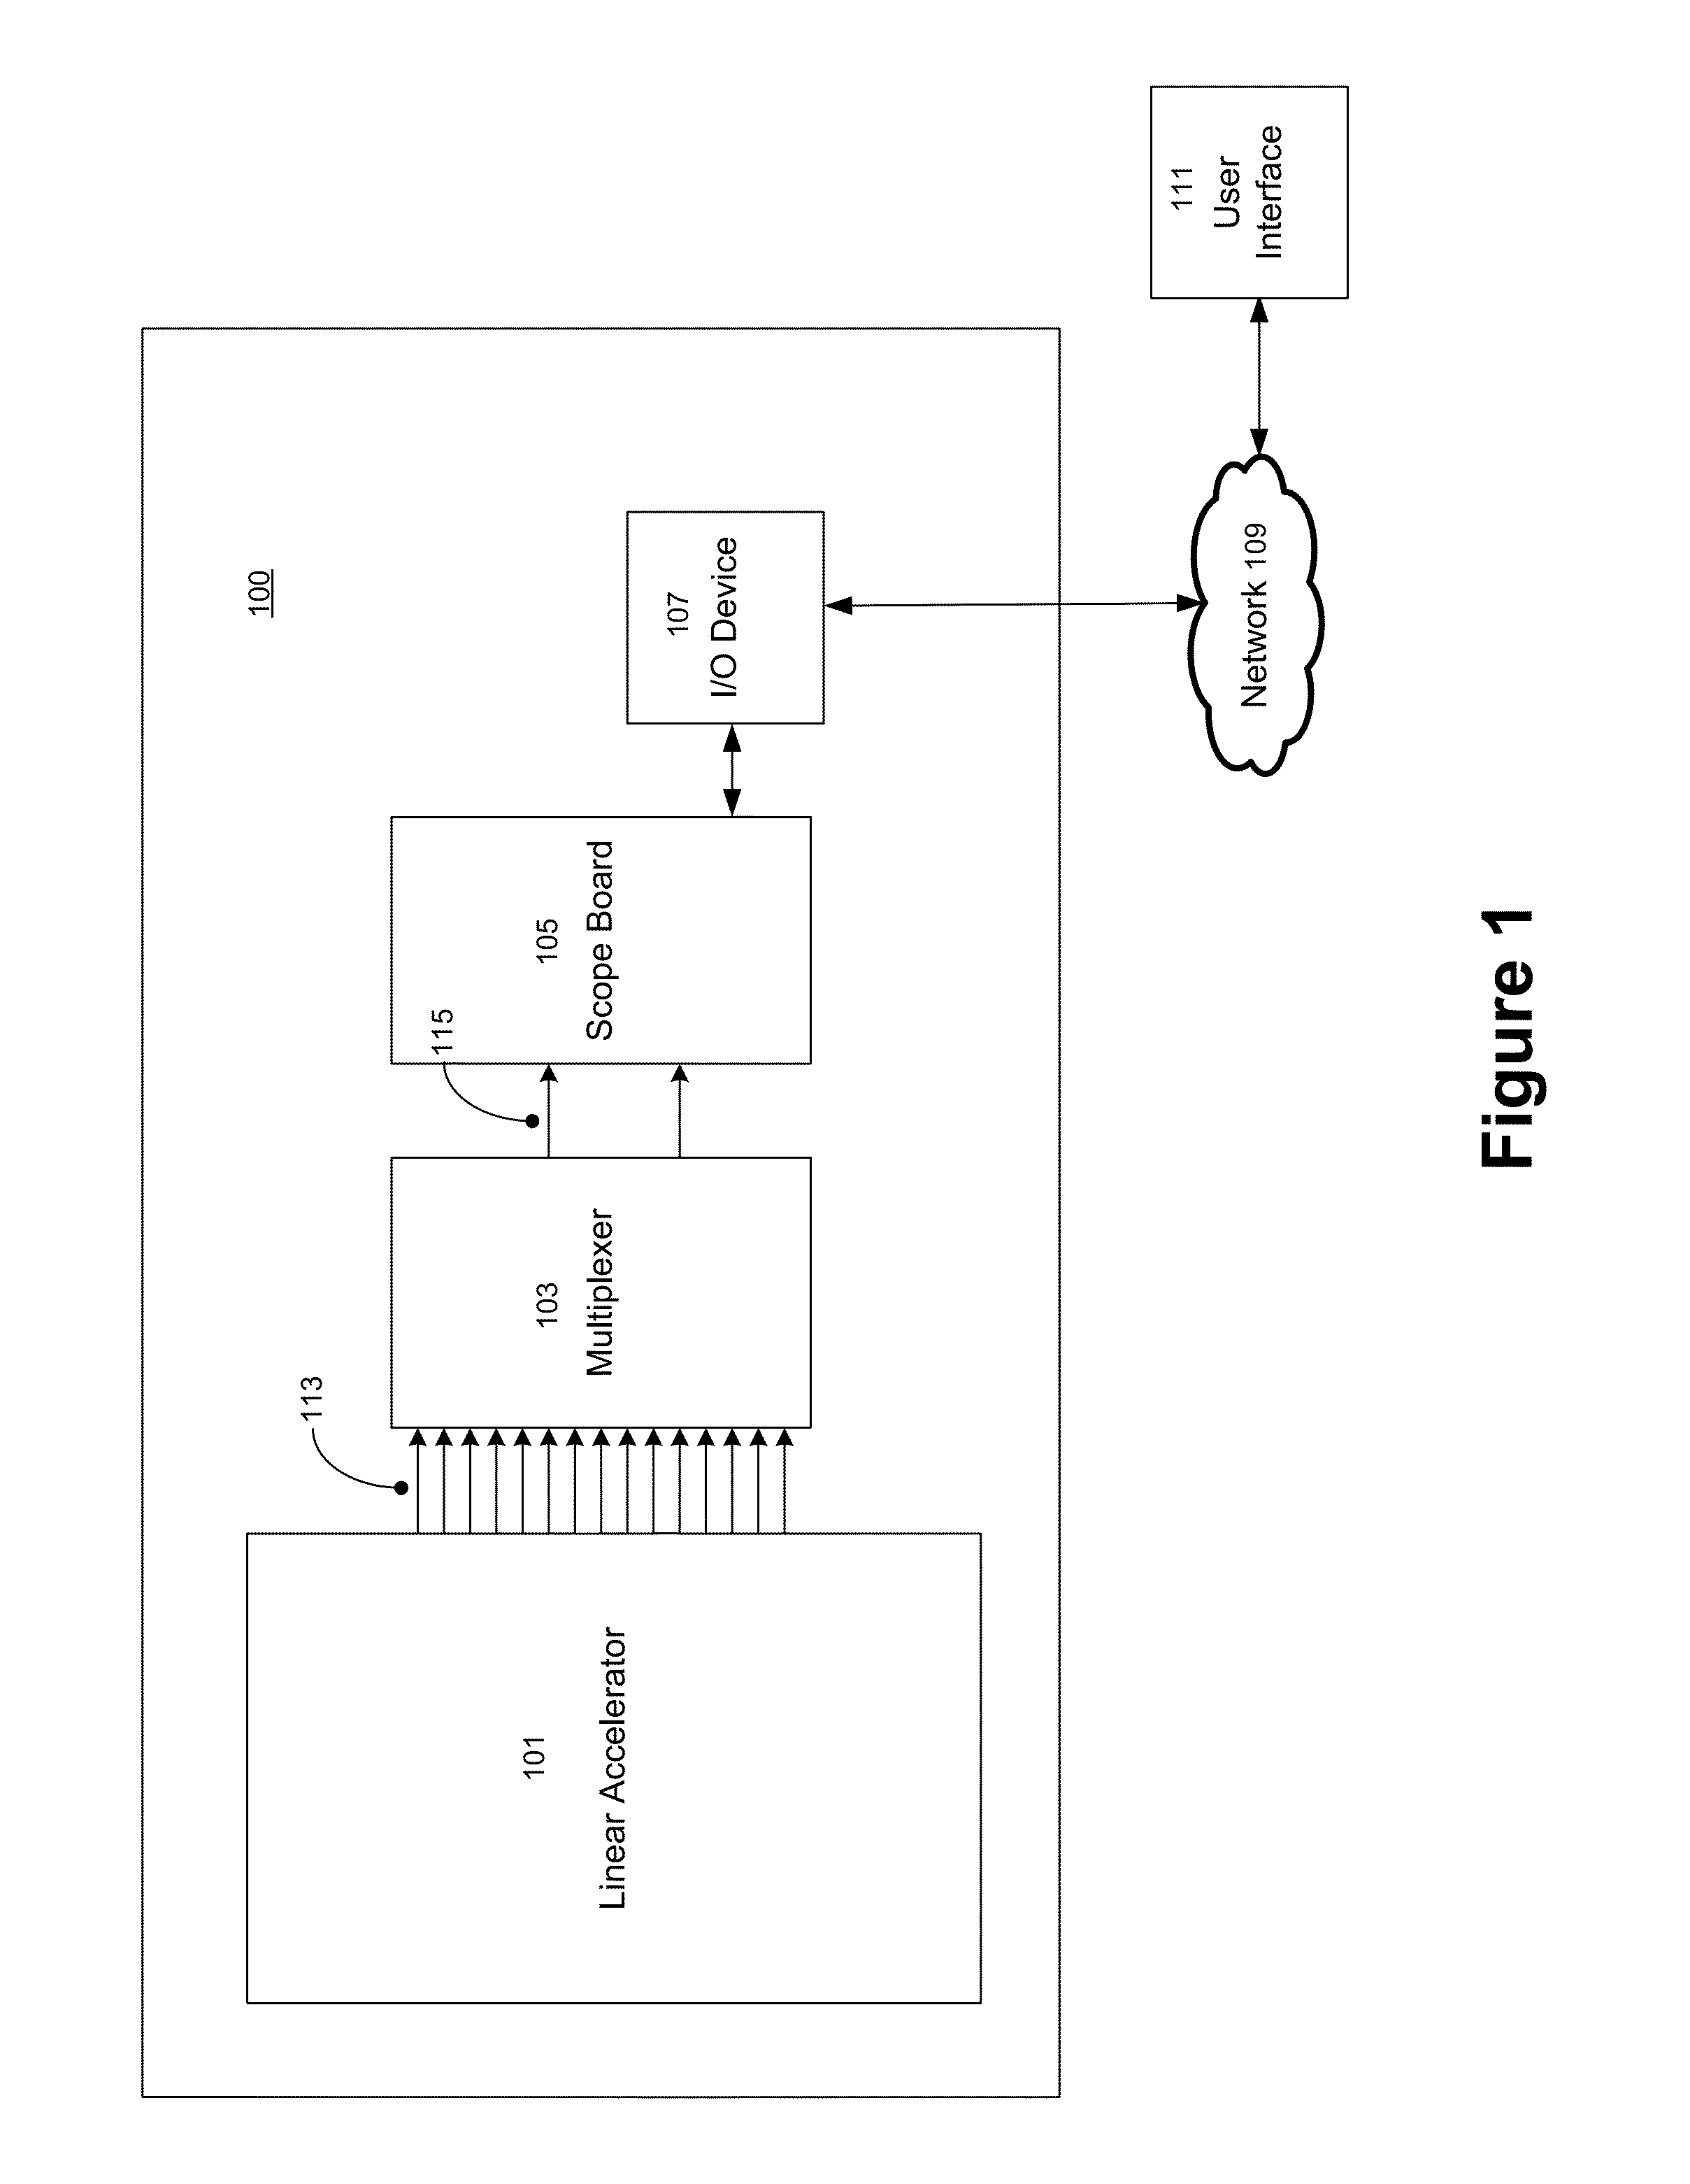 Medical linear accelerator signal analyzer and display device